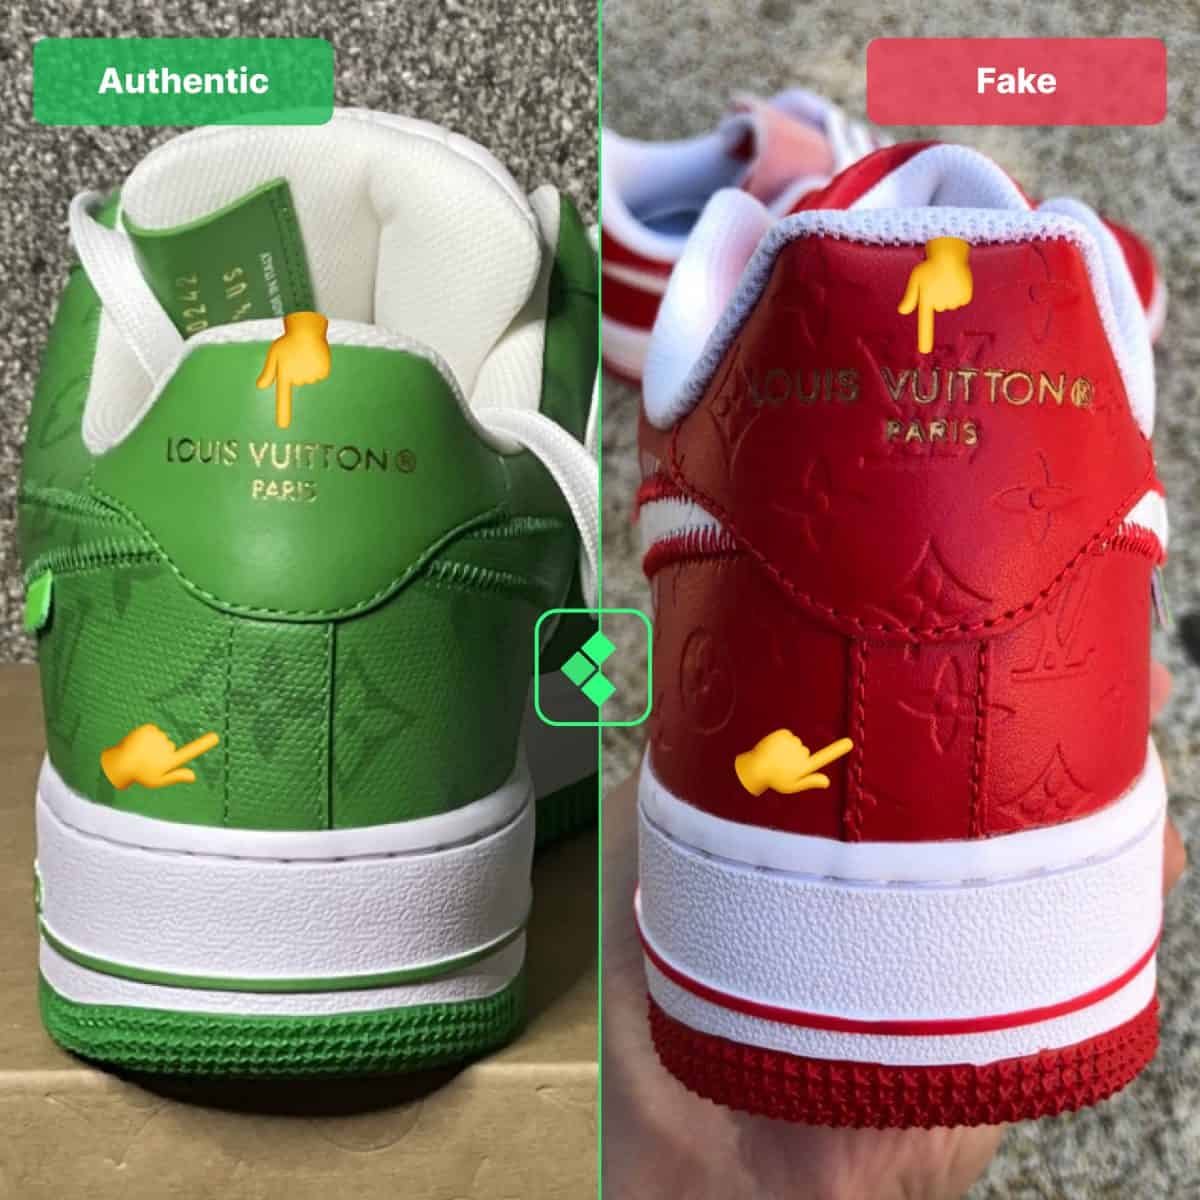 How To Authenticate Louis Vuitton Air Force 1